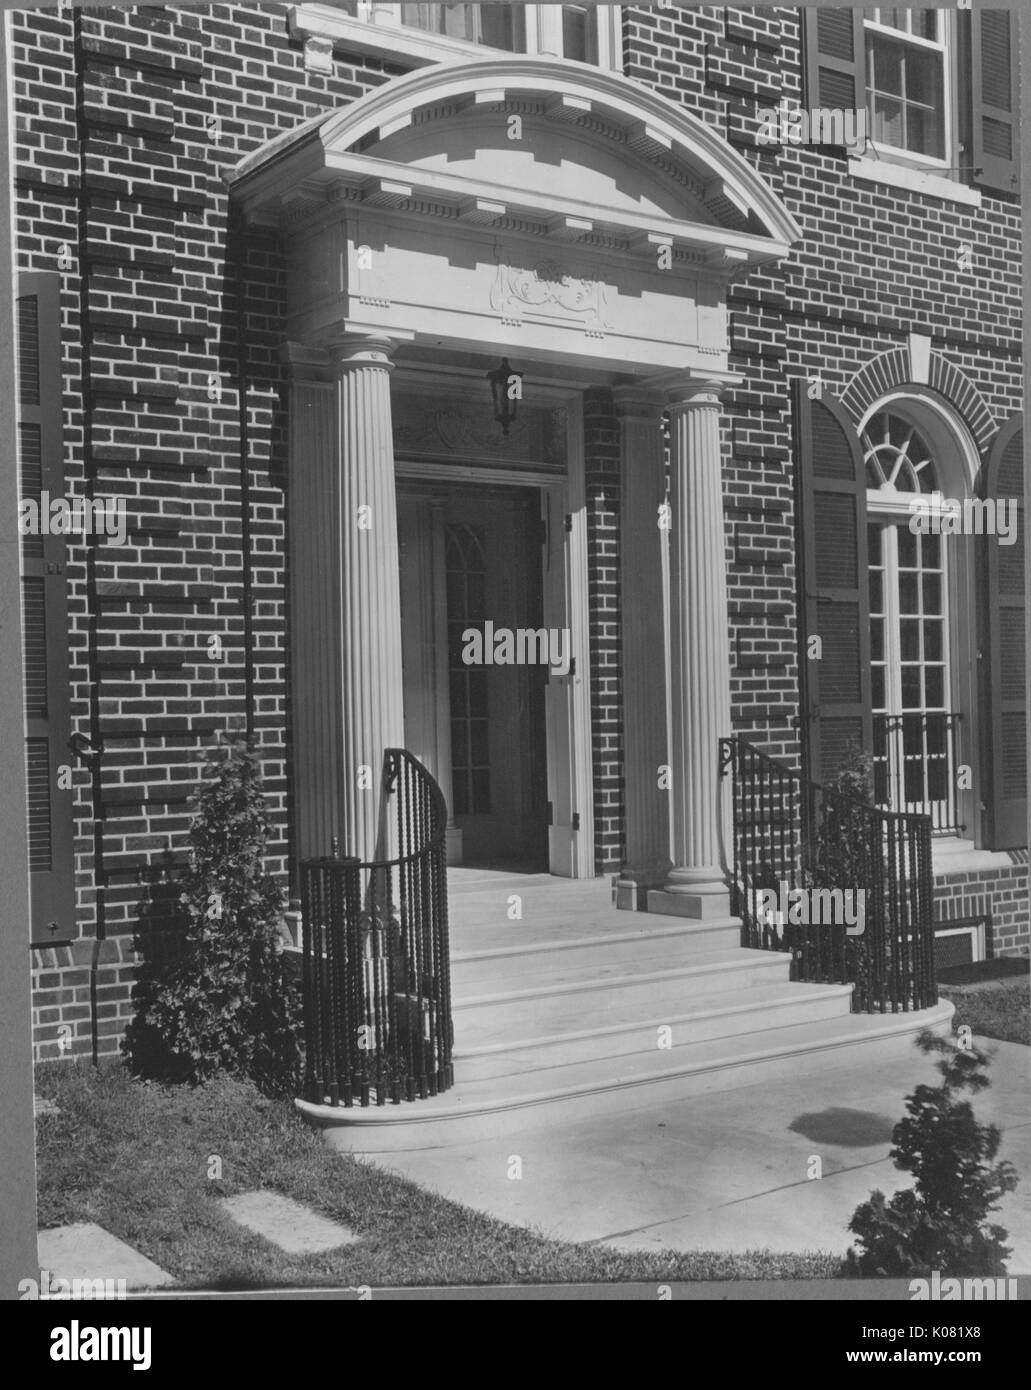 Picture of the front porch of a home in Roland Park home in Baltimore, with spiraling black railing, two Doric columns, and the house is of brick, United States, 1950. This image is from a series documenting the construction and sale of homes in the Roland Park/Guilford neighborhood of Baltimore, a streetcar suburb and one of the first planned communities in the United States. Stock Photo